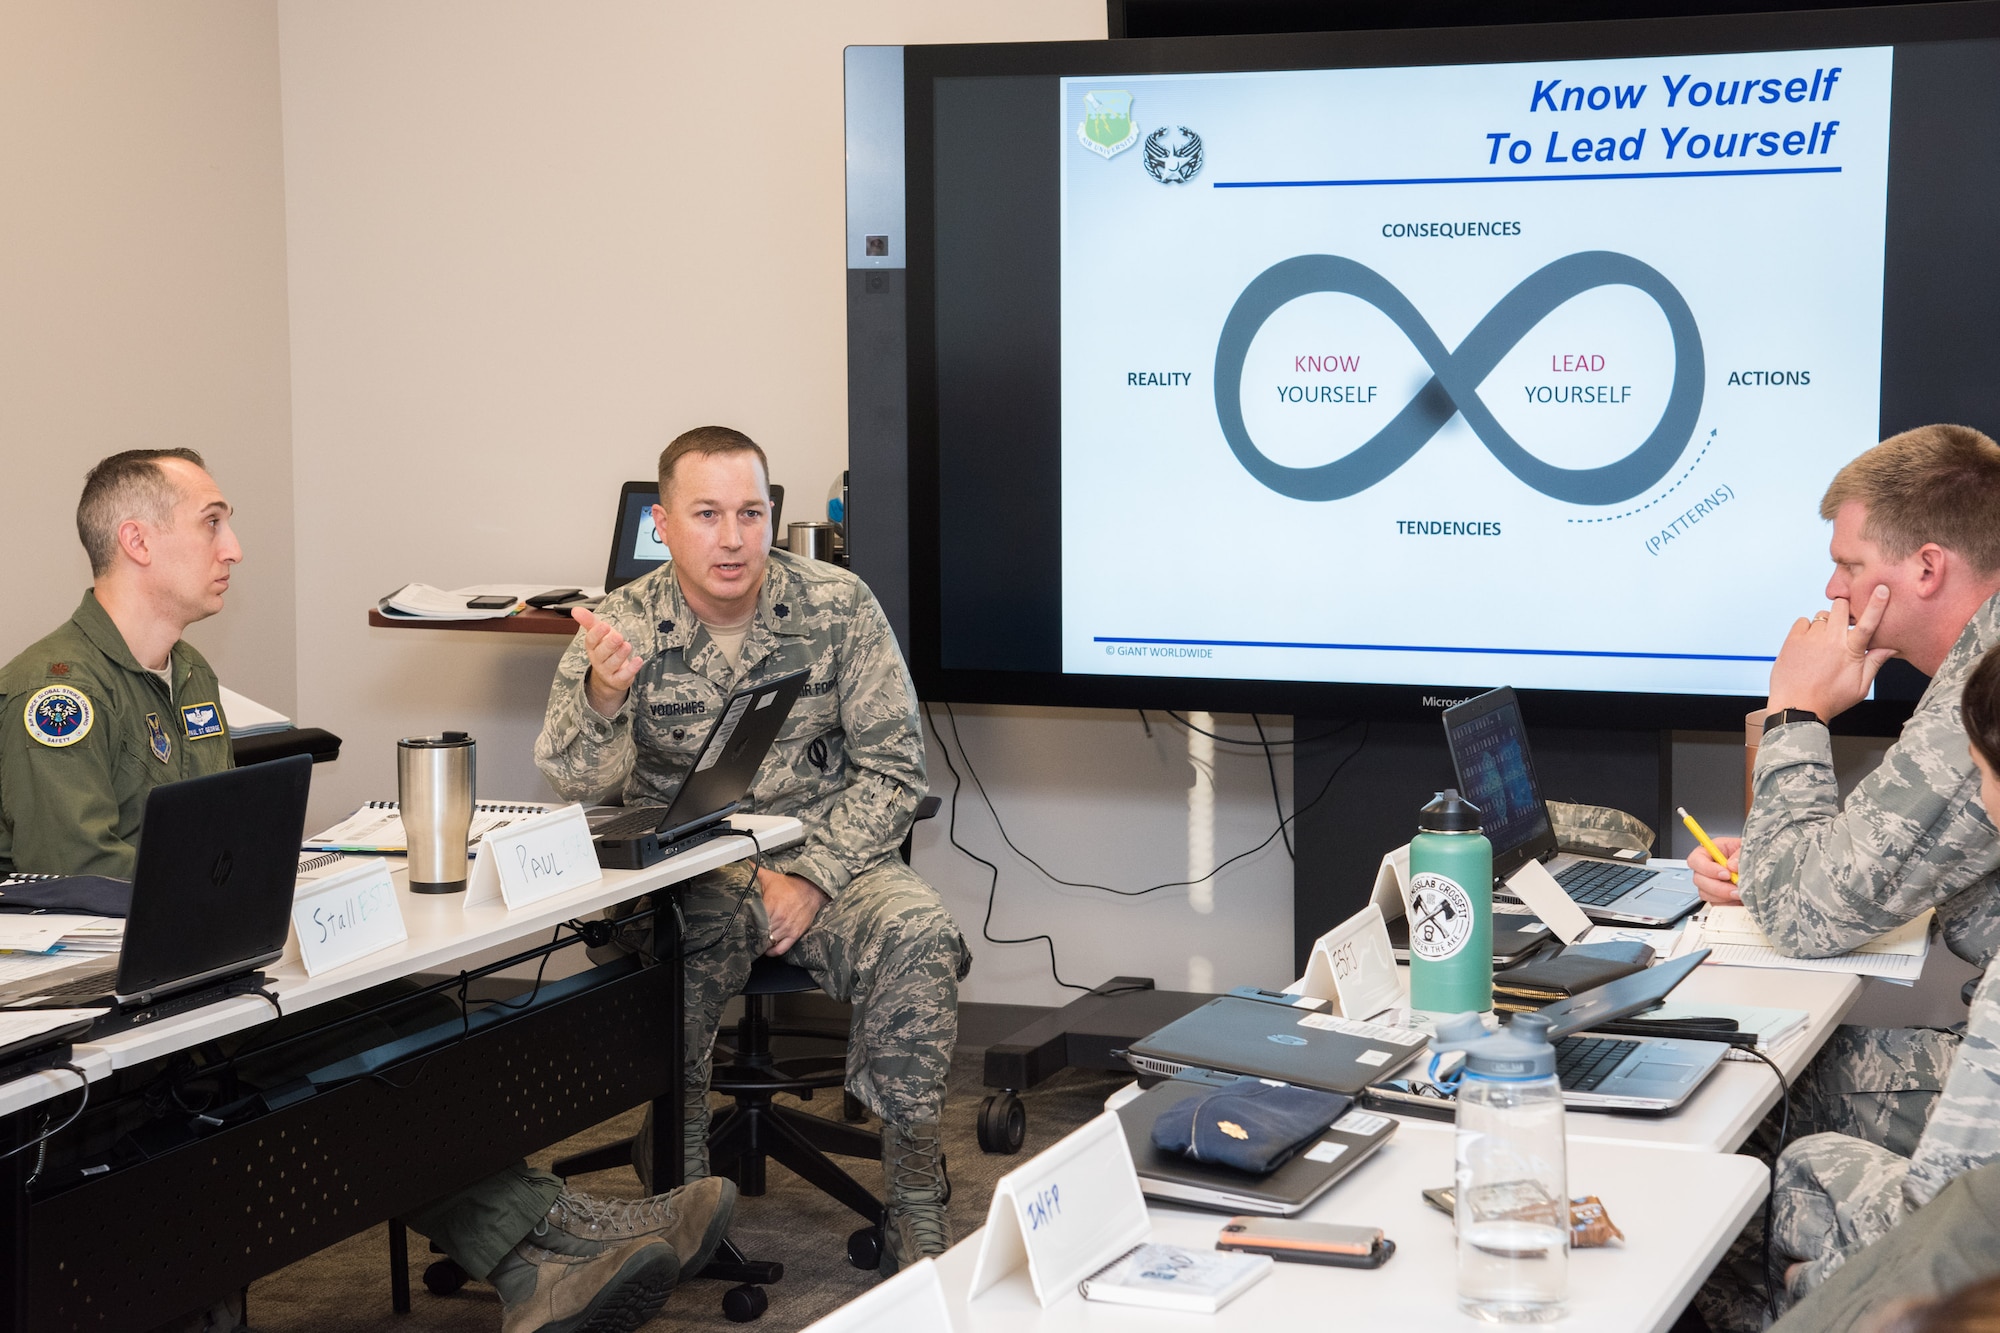 Lt. Col. Daniel Voorhies, part of the initial faculty cadre, leads a seminar discussion with students on self-awareness during the Leader Development Course for Squadron Command, Oct. 31, 2018, at Air University, Maxwell Air Force Base, Alabama. The course builds on leadership experience and education, with a primary emphasis of instilling in students a greater mastery of the ‘human domain’ of leadership. (U.S. Air Force photo by William Birchfield)